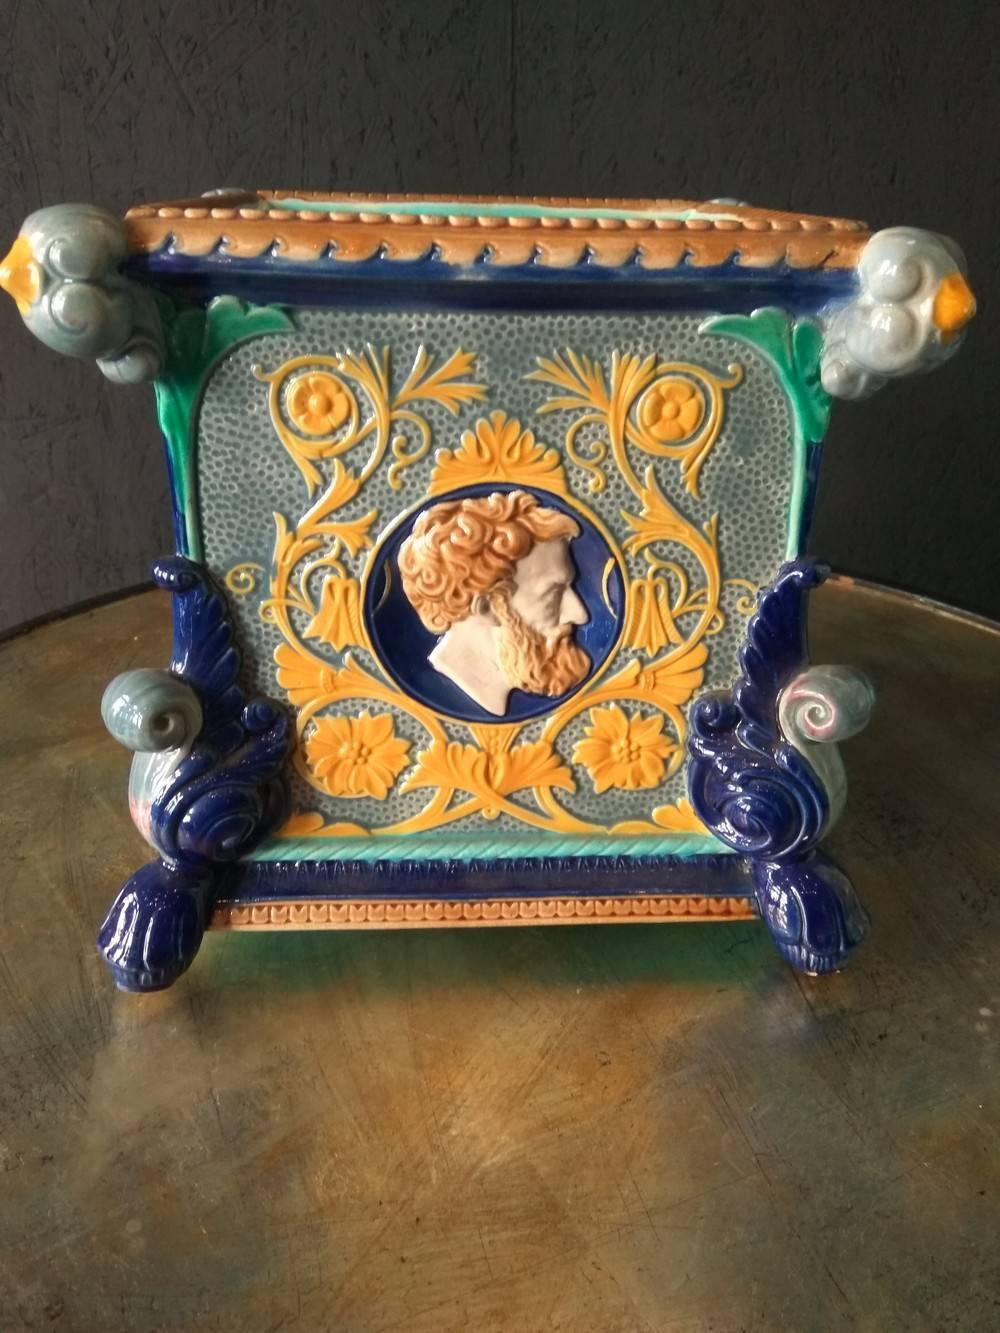 Lovely planter with four different portraits in medallions. Inside the planter, one will find the blue color, typical of Minton Manufactory. Each portraits in medallions are decorated with vegetal interlacing colored in yellow, also typical of